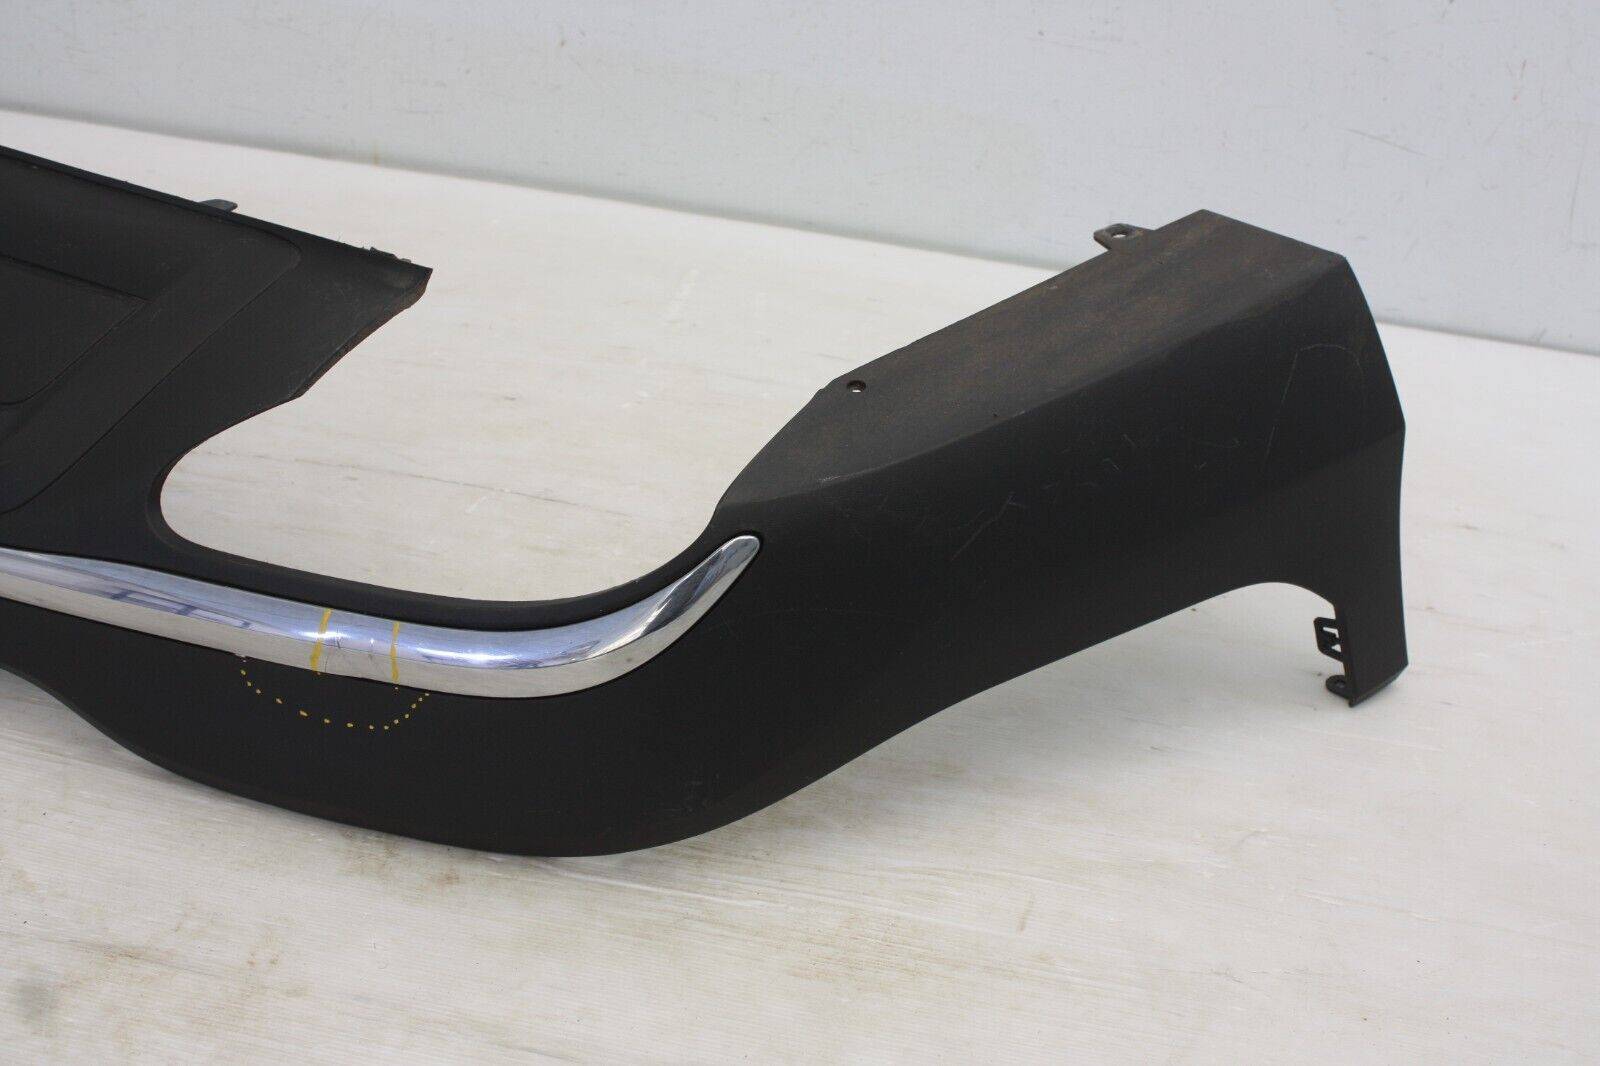 Mercedes-GLC-X253-AMG-Rear-Lower-Section-2015-TO-2019-A2538850300-DAMADED-175636163232-6